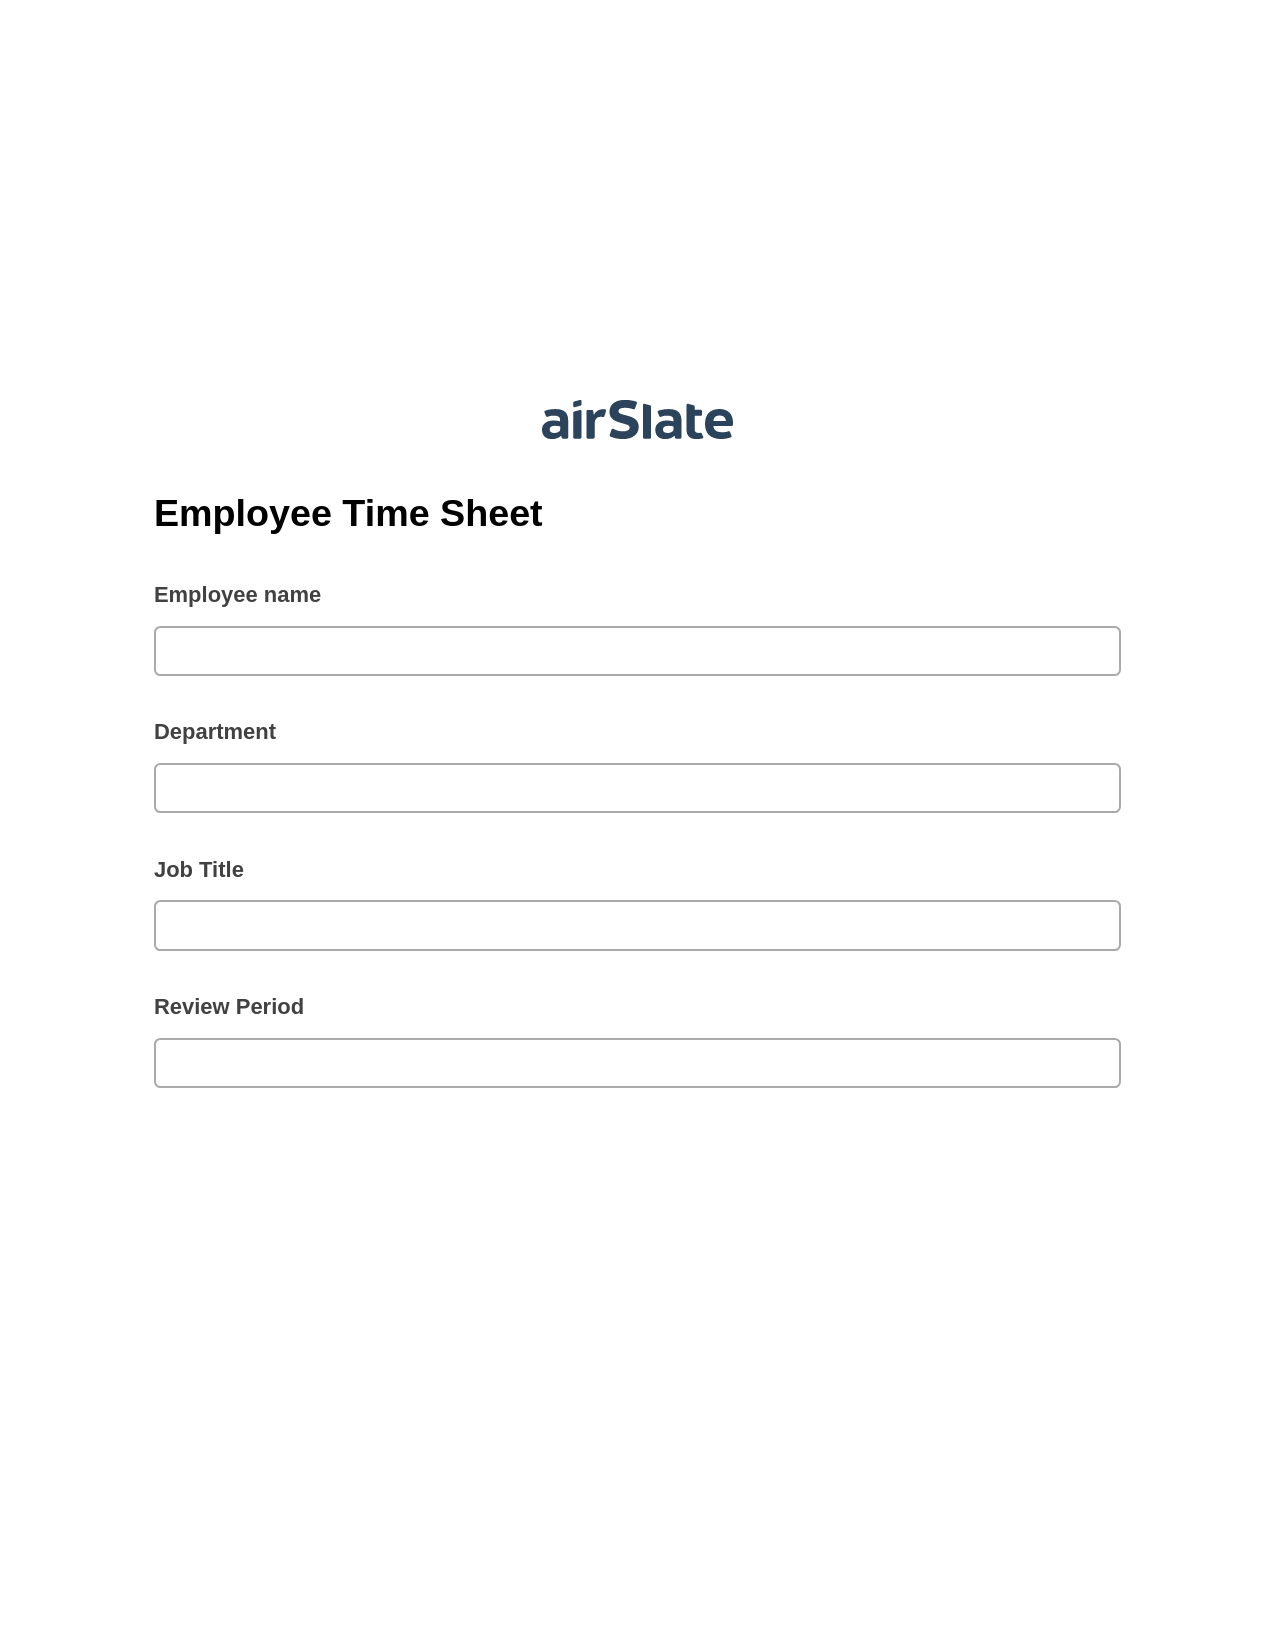 Multirole Employee Time Sheet Pre-fill from Salesforce Records Bot, Update Audit Trail Bot, Email Notification Postfinish Bot